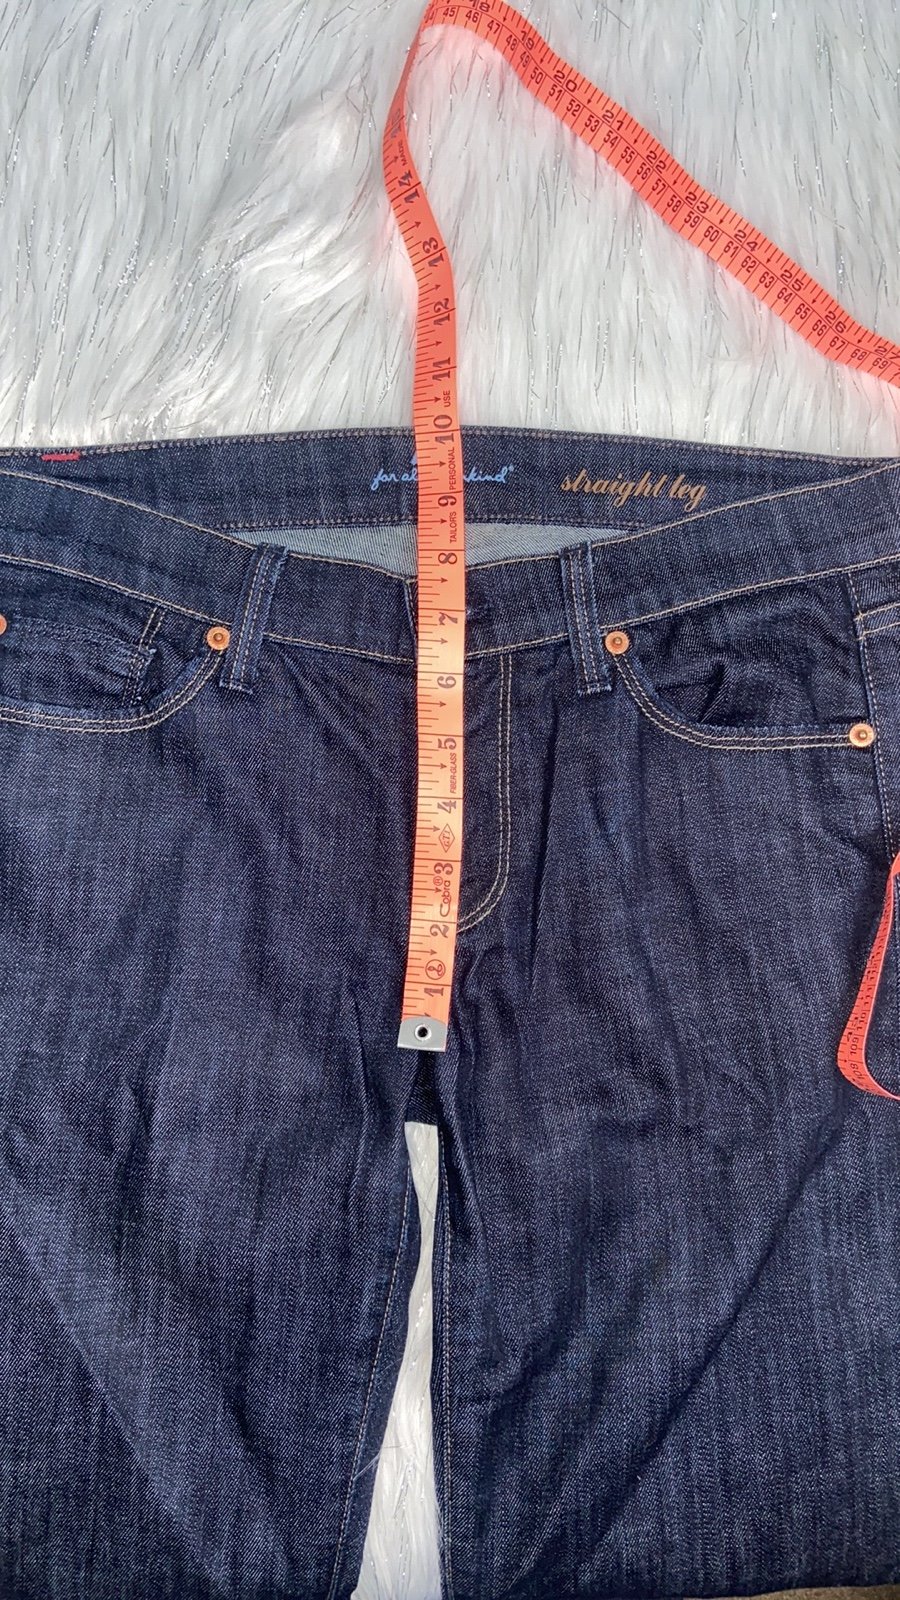 Classic 7 For All Mankind Women´s Straight Leg Jeans size 28 gbxQBcQx4 for sale